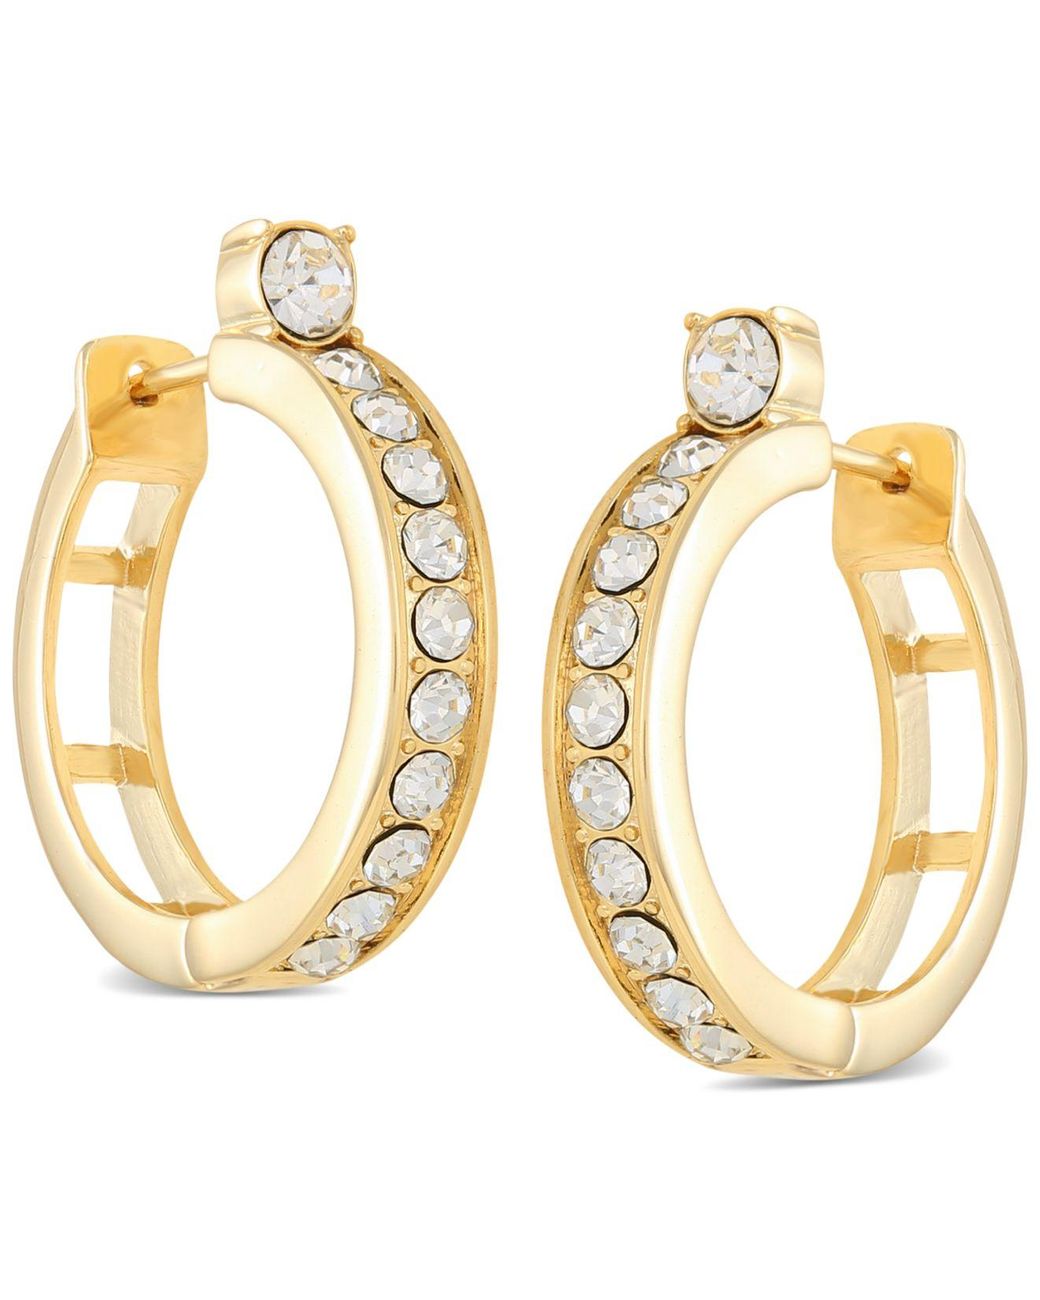 Guess Gold-tone Small Crystal Hoop Earrings, 1